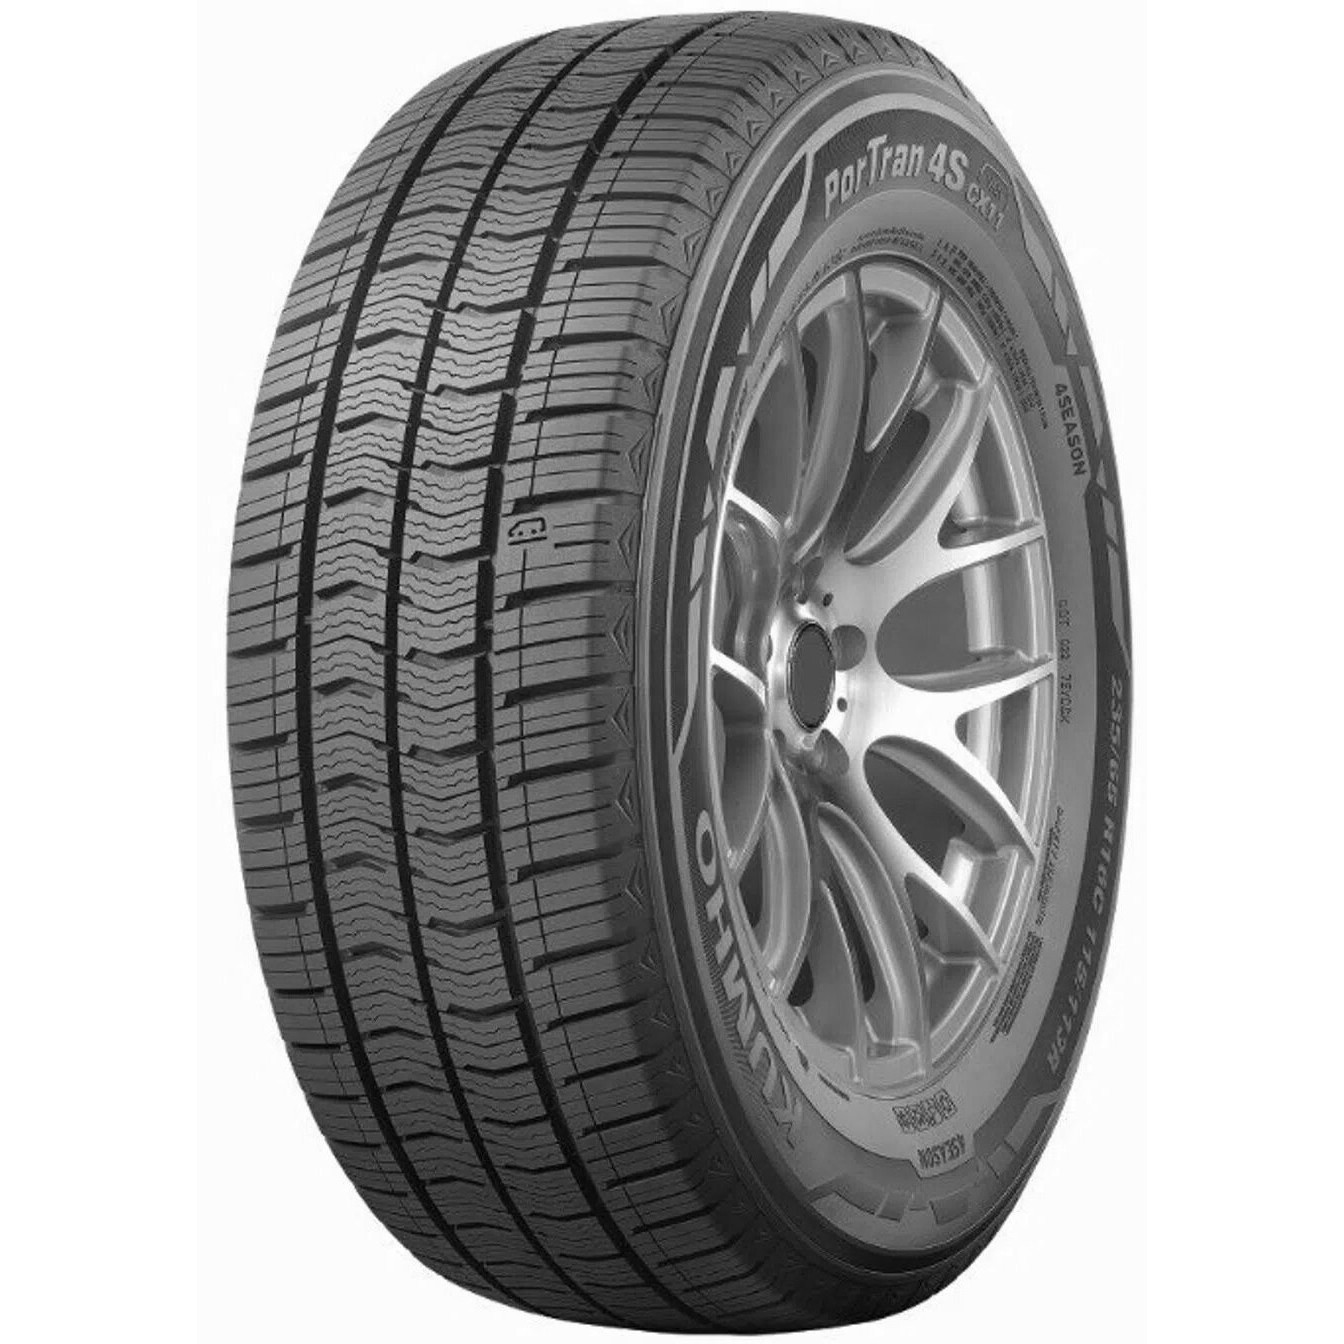 Gomme Nuove Marshal 205/65 R16 107T CX11 M+S pneumatici nuovi All Season